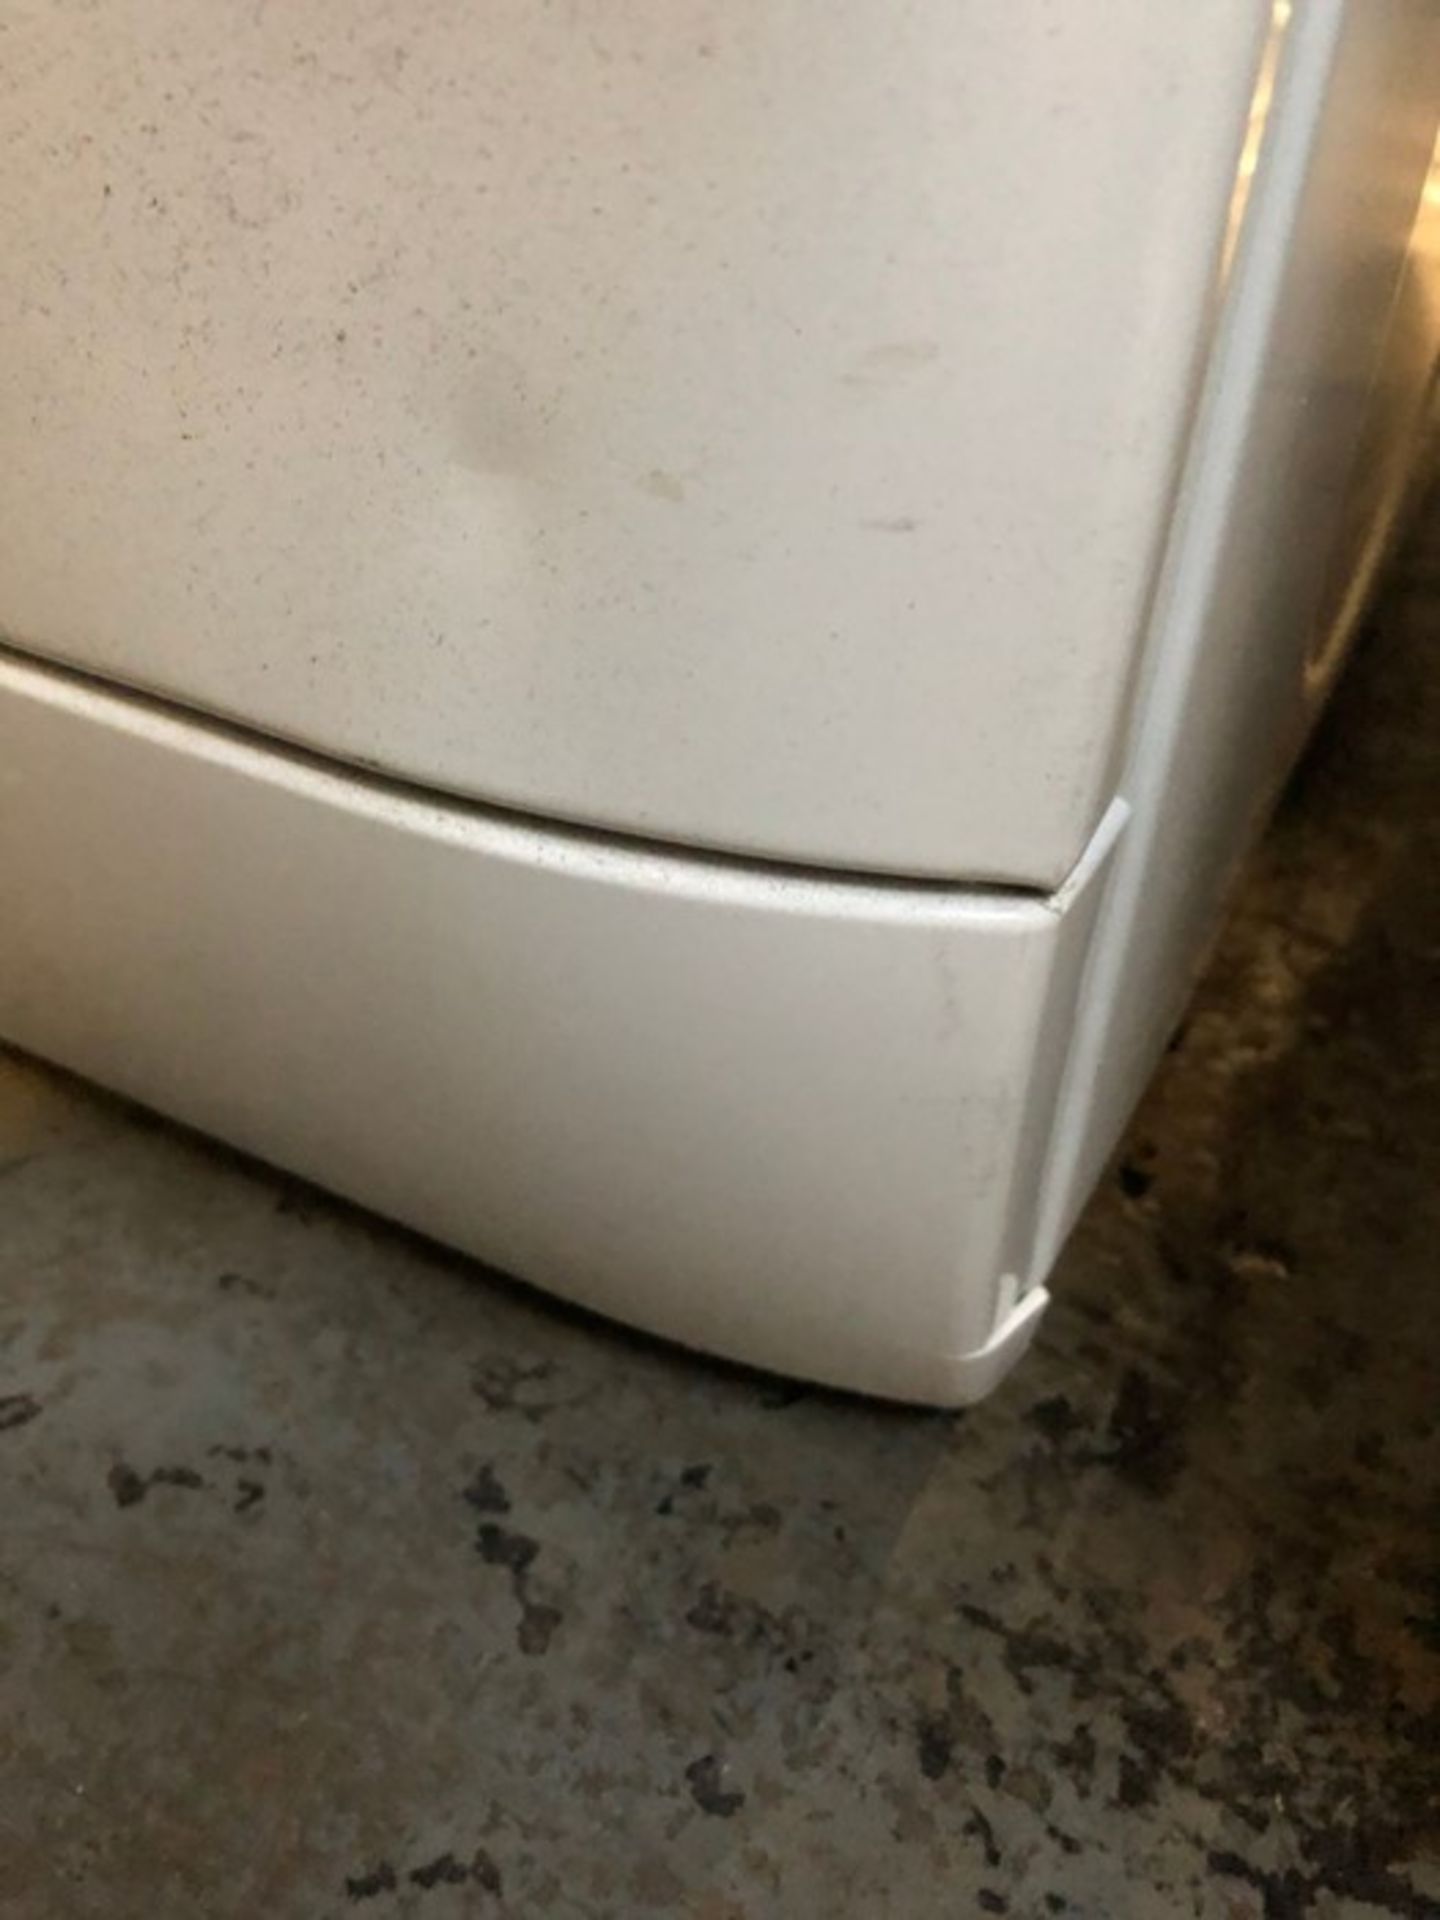 HOTPOINT VENTED TUMBLE DRYER - FETV60CP / RRP £209.99 / UNTESTED, UNUSED. COSMETIC DAMAGE, ONE - Image 3 of 5